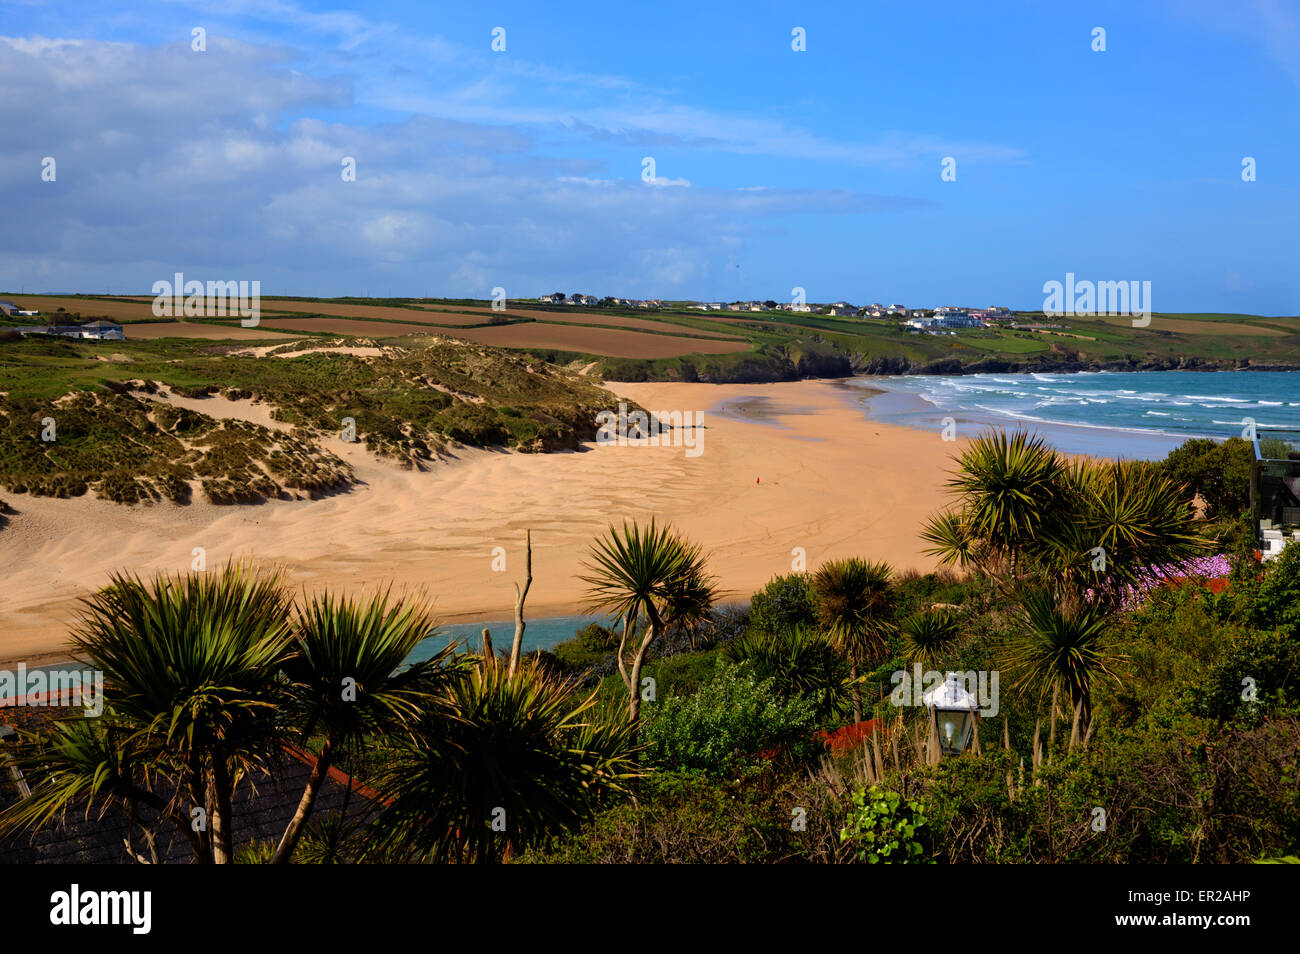 Crantock beach North Cornwall England UK near Newquay with palm trees and blue sky and sea in spring Stock Photo